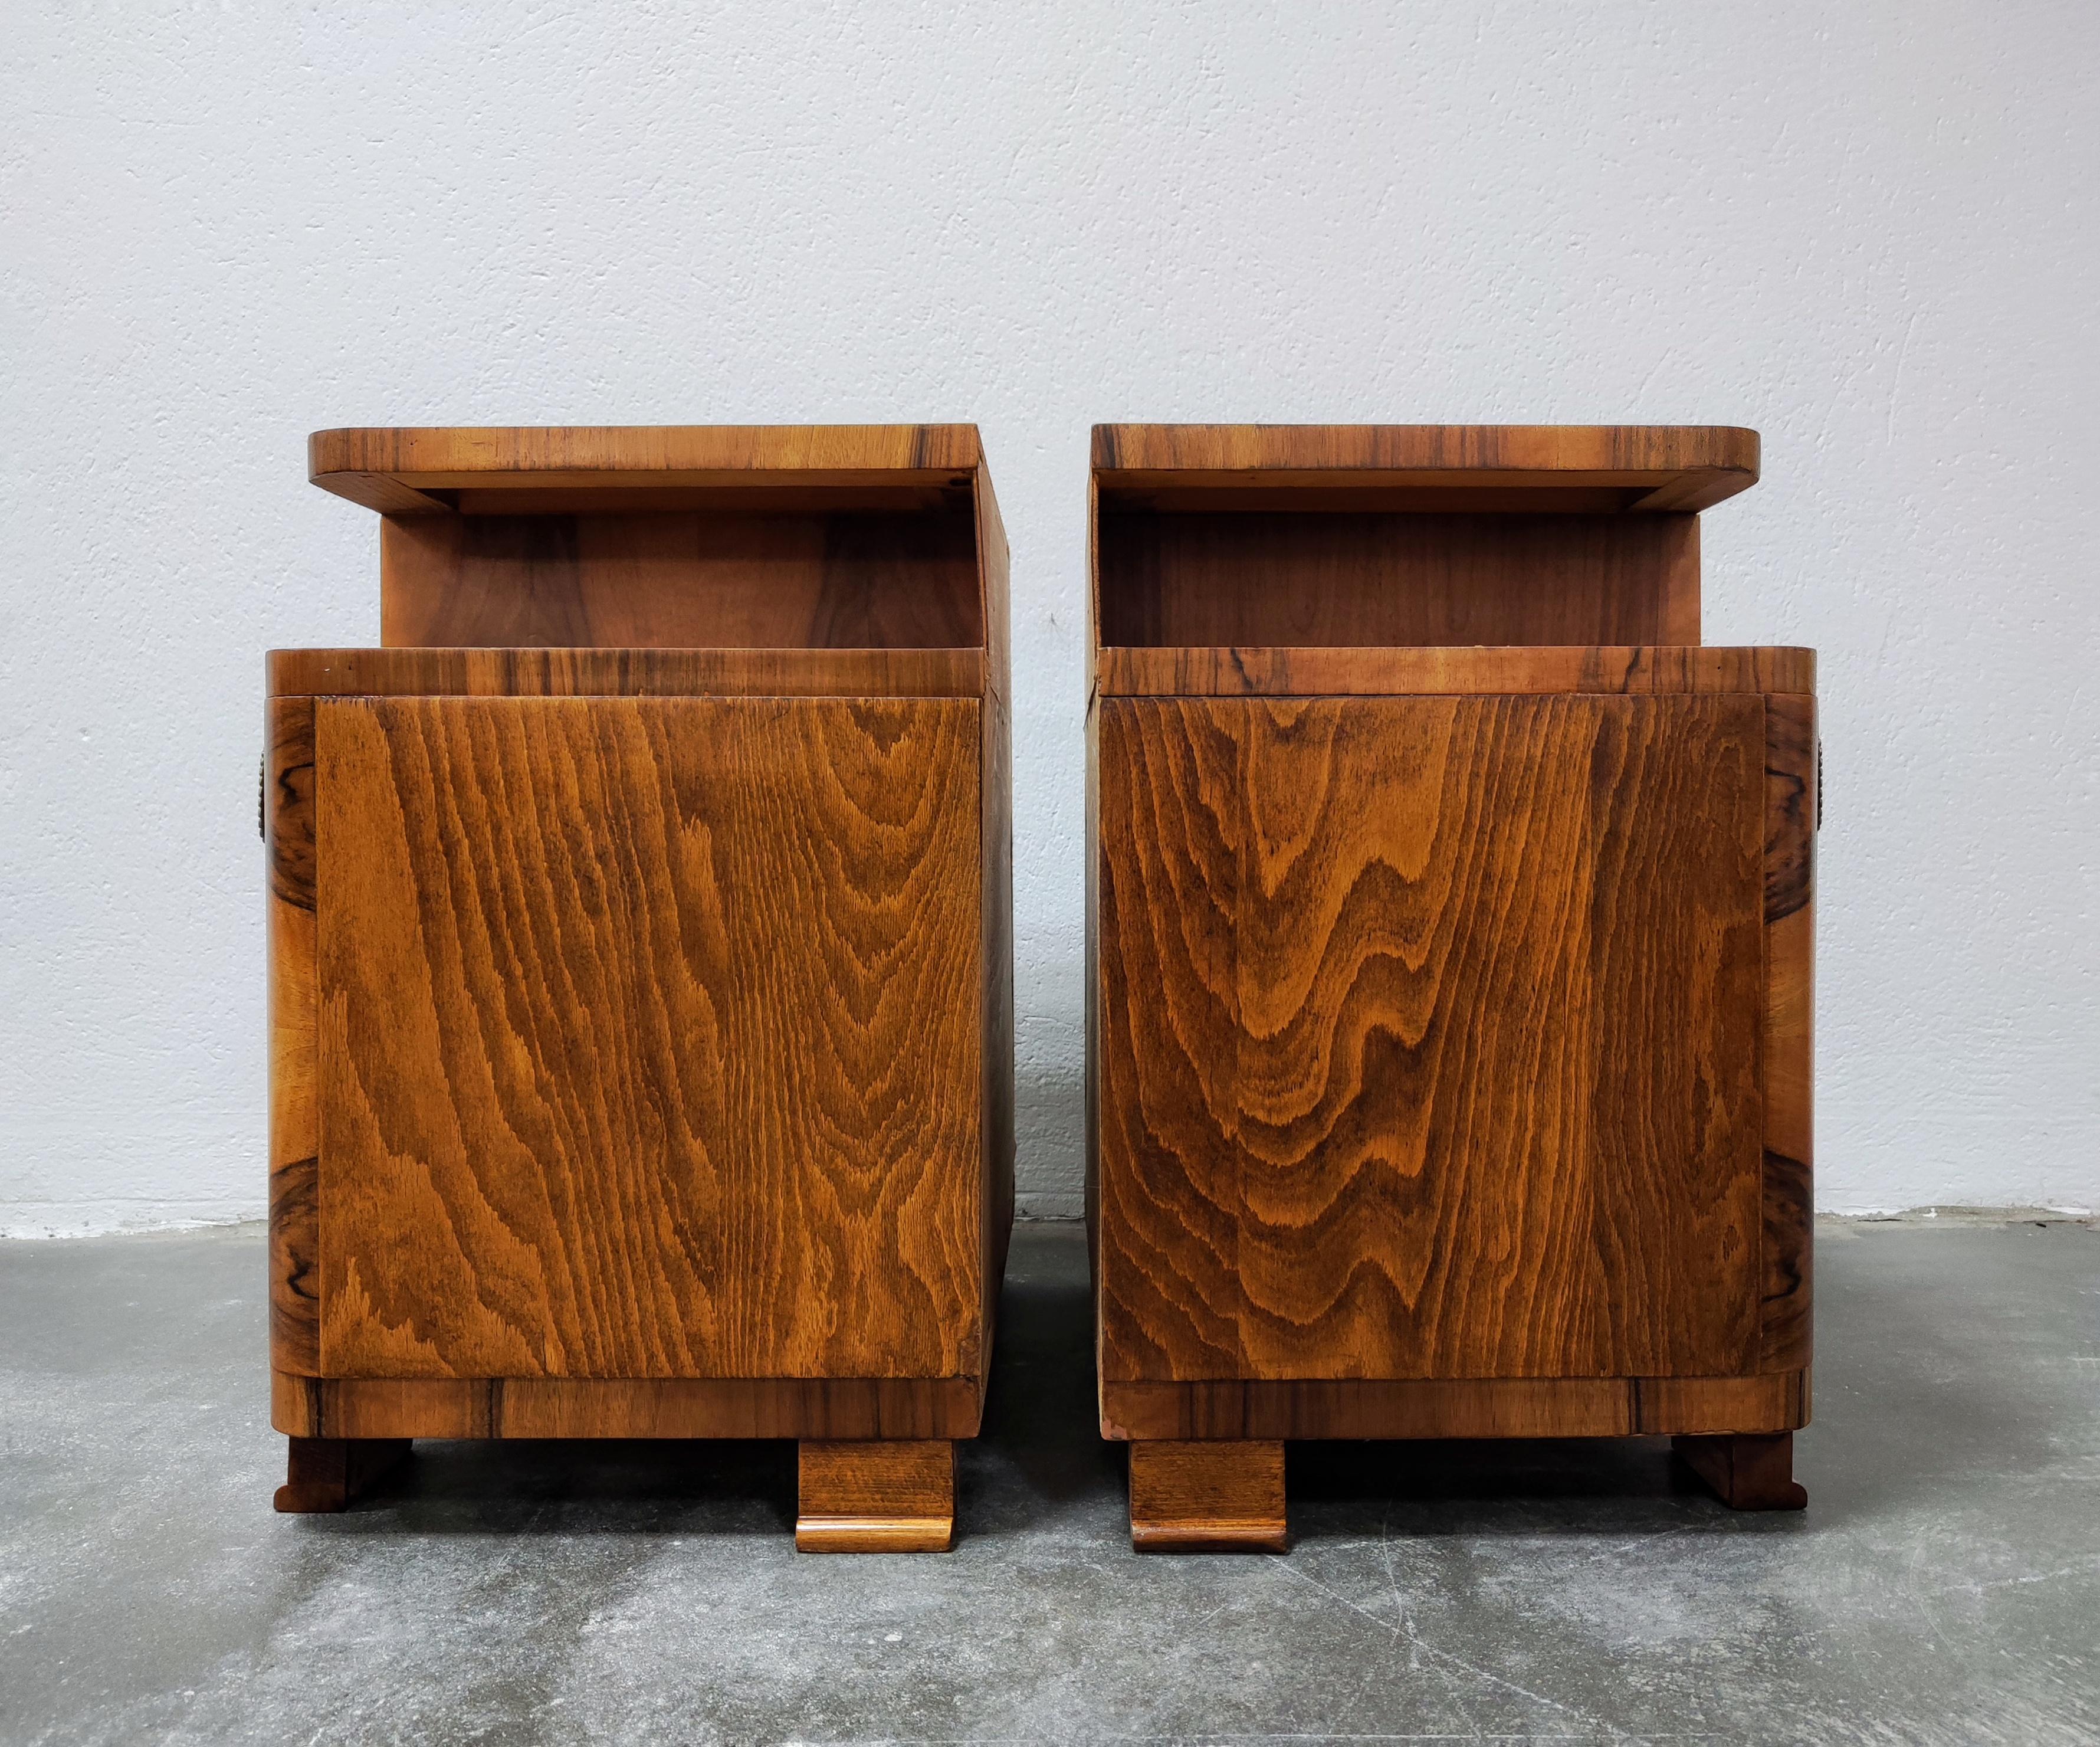 In this listing you will find a pair of gorgeous Art Deco Nightstands. They feature asymmetrical shape, with one small drawer and a cabinet beneath it. The top and the doors of the nightstands are done in walnut roots (burlwood) veneer and feature